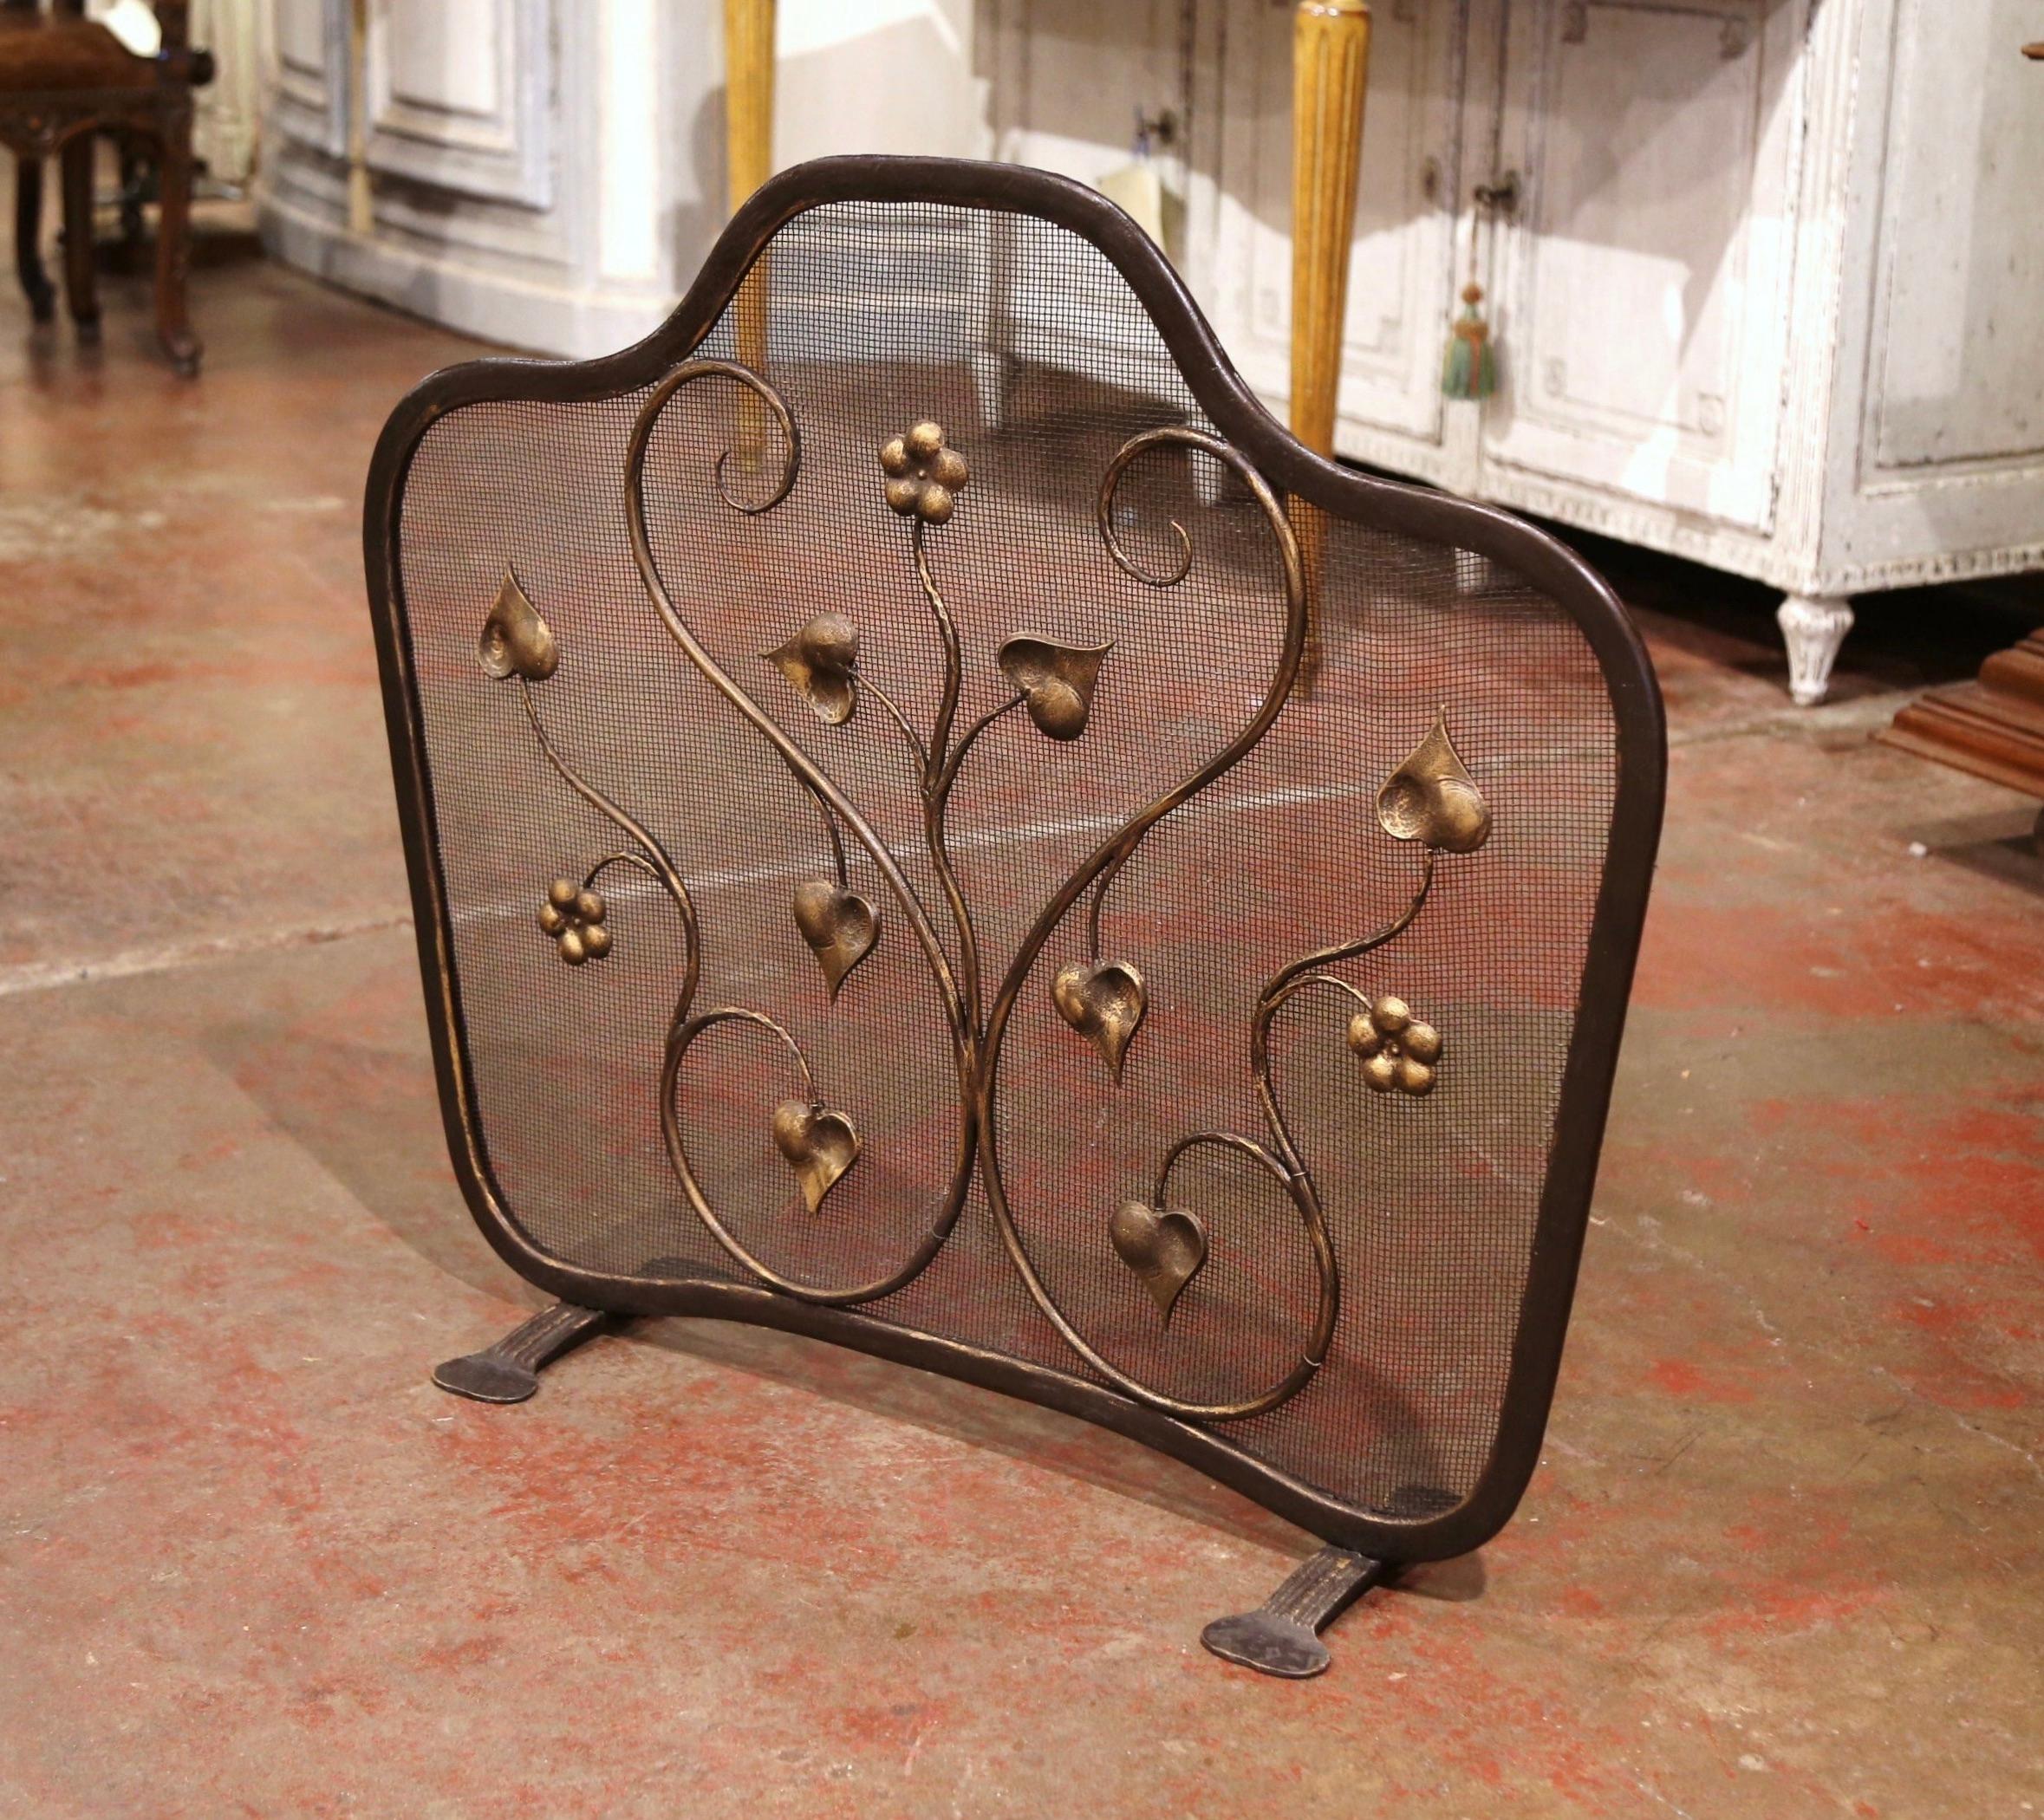 Decorate a fireplace hearth with this elegant freestanding vintage iron screen. Forged in France circa 1980, the important forged screen with arched top stands on small feet and features decorative scroll and floral motifs throughout; it is further